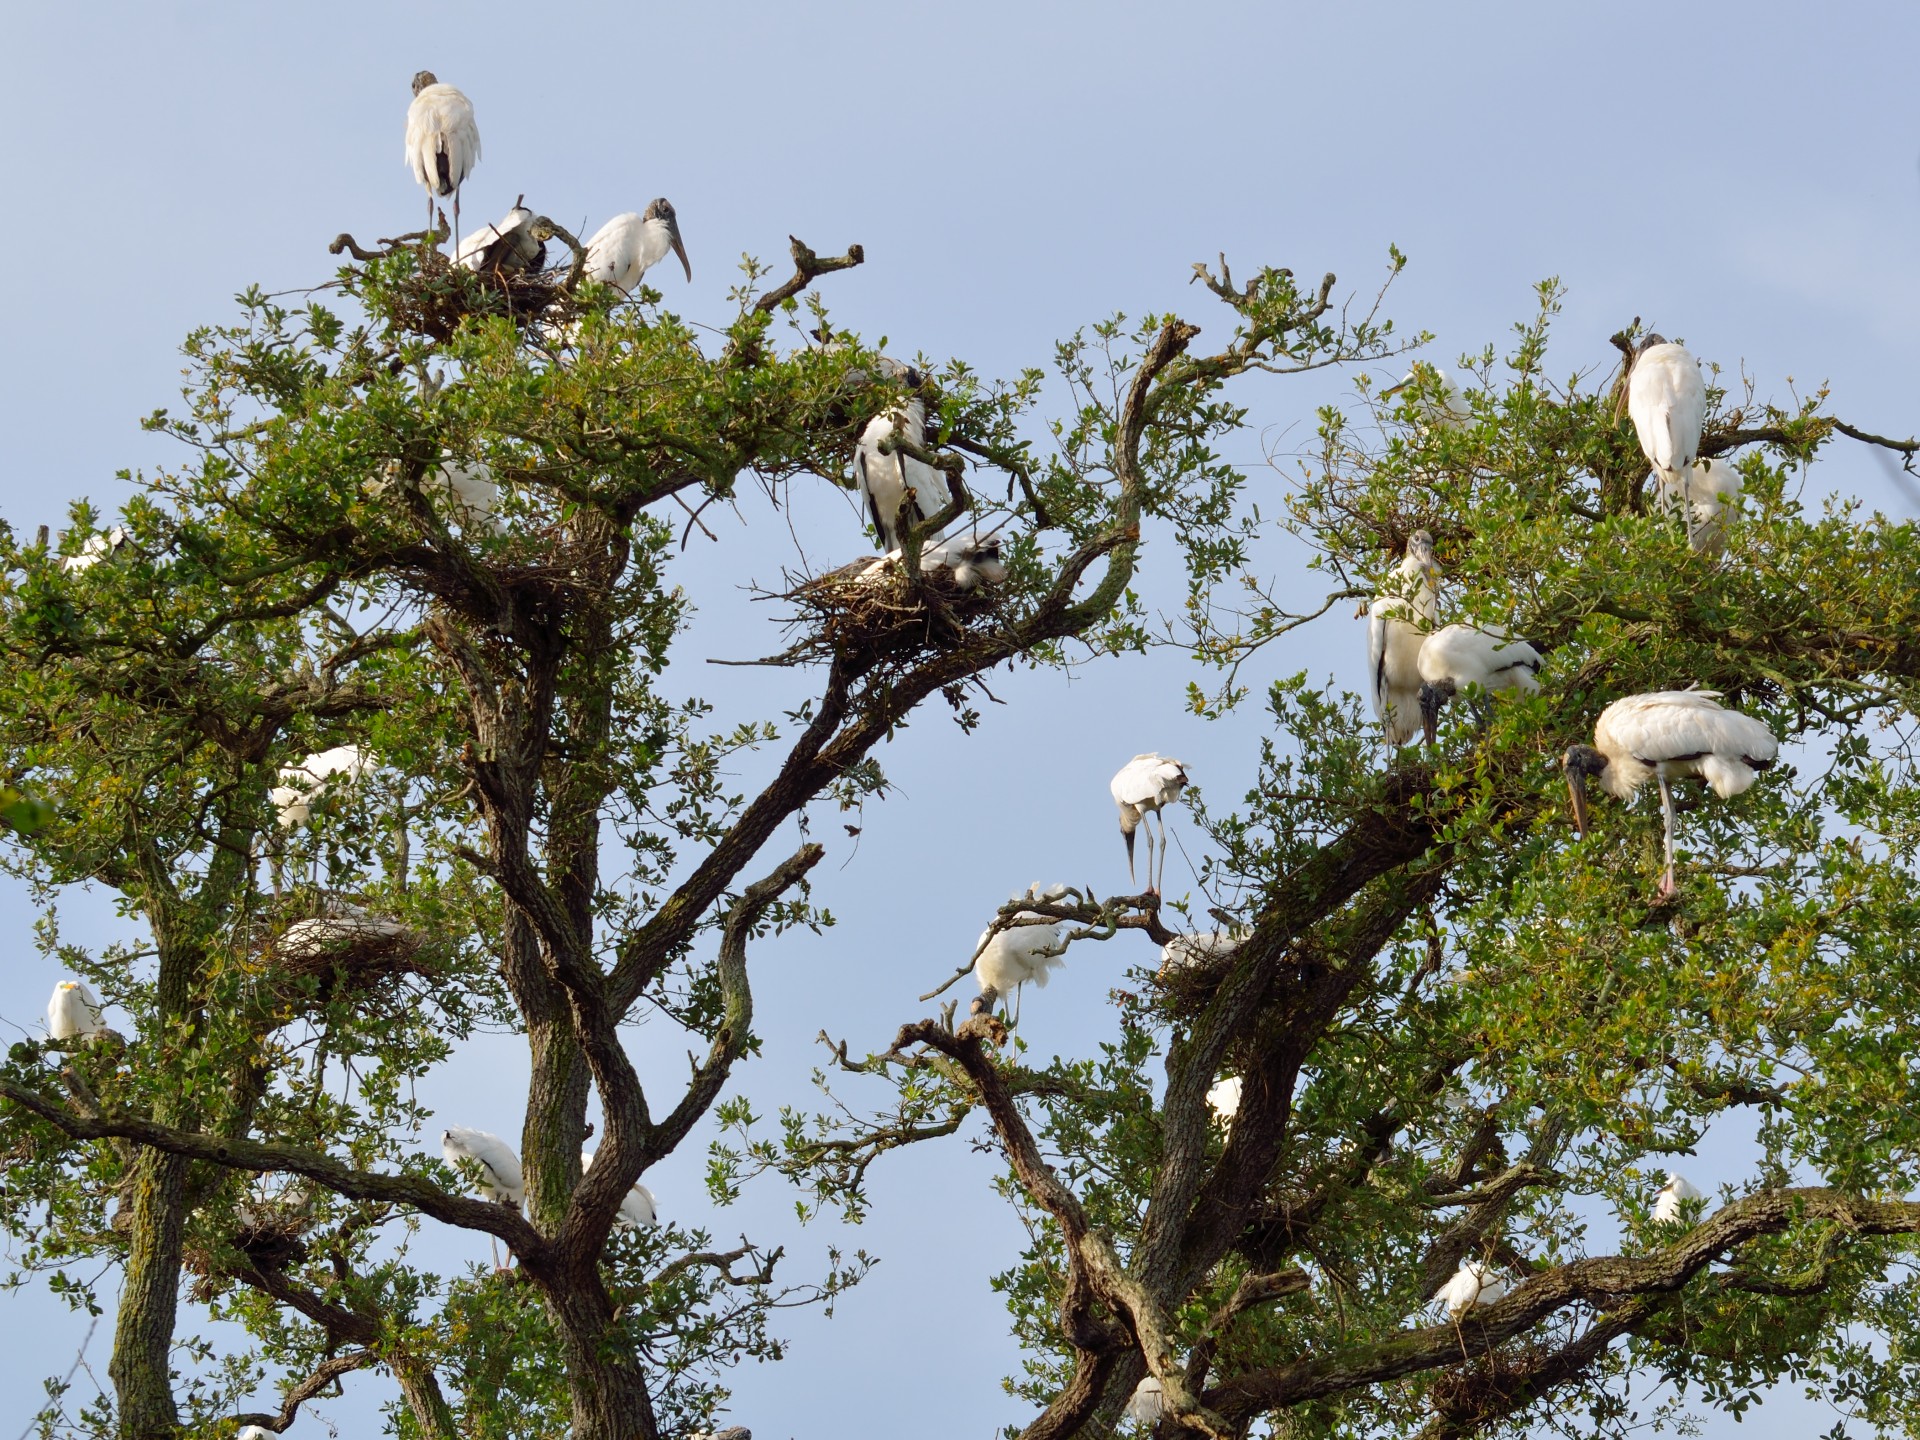 Wood Storks in the wild nesting